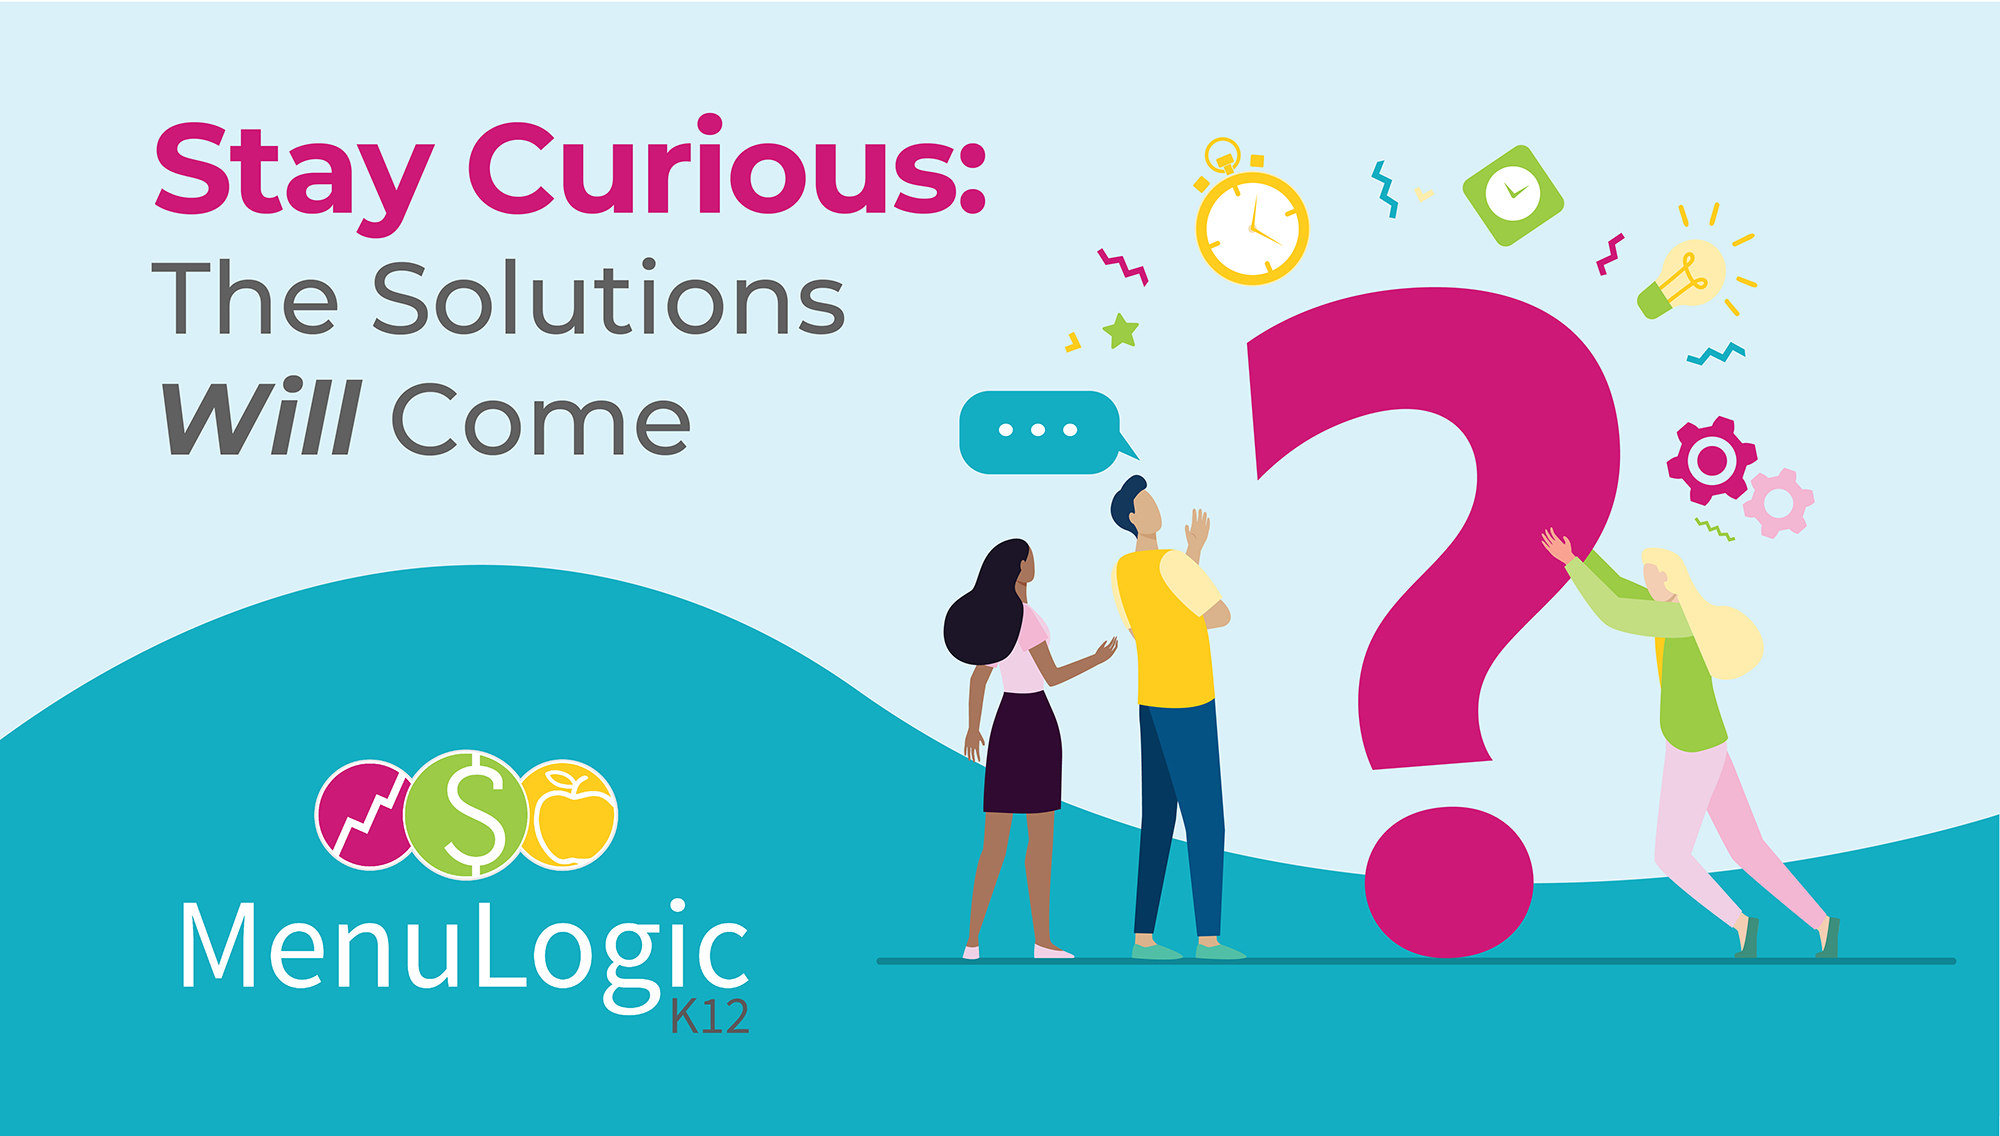 Stay Curious: The Solutions Will Come